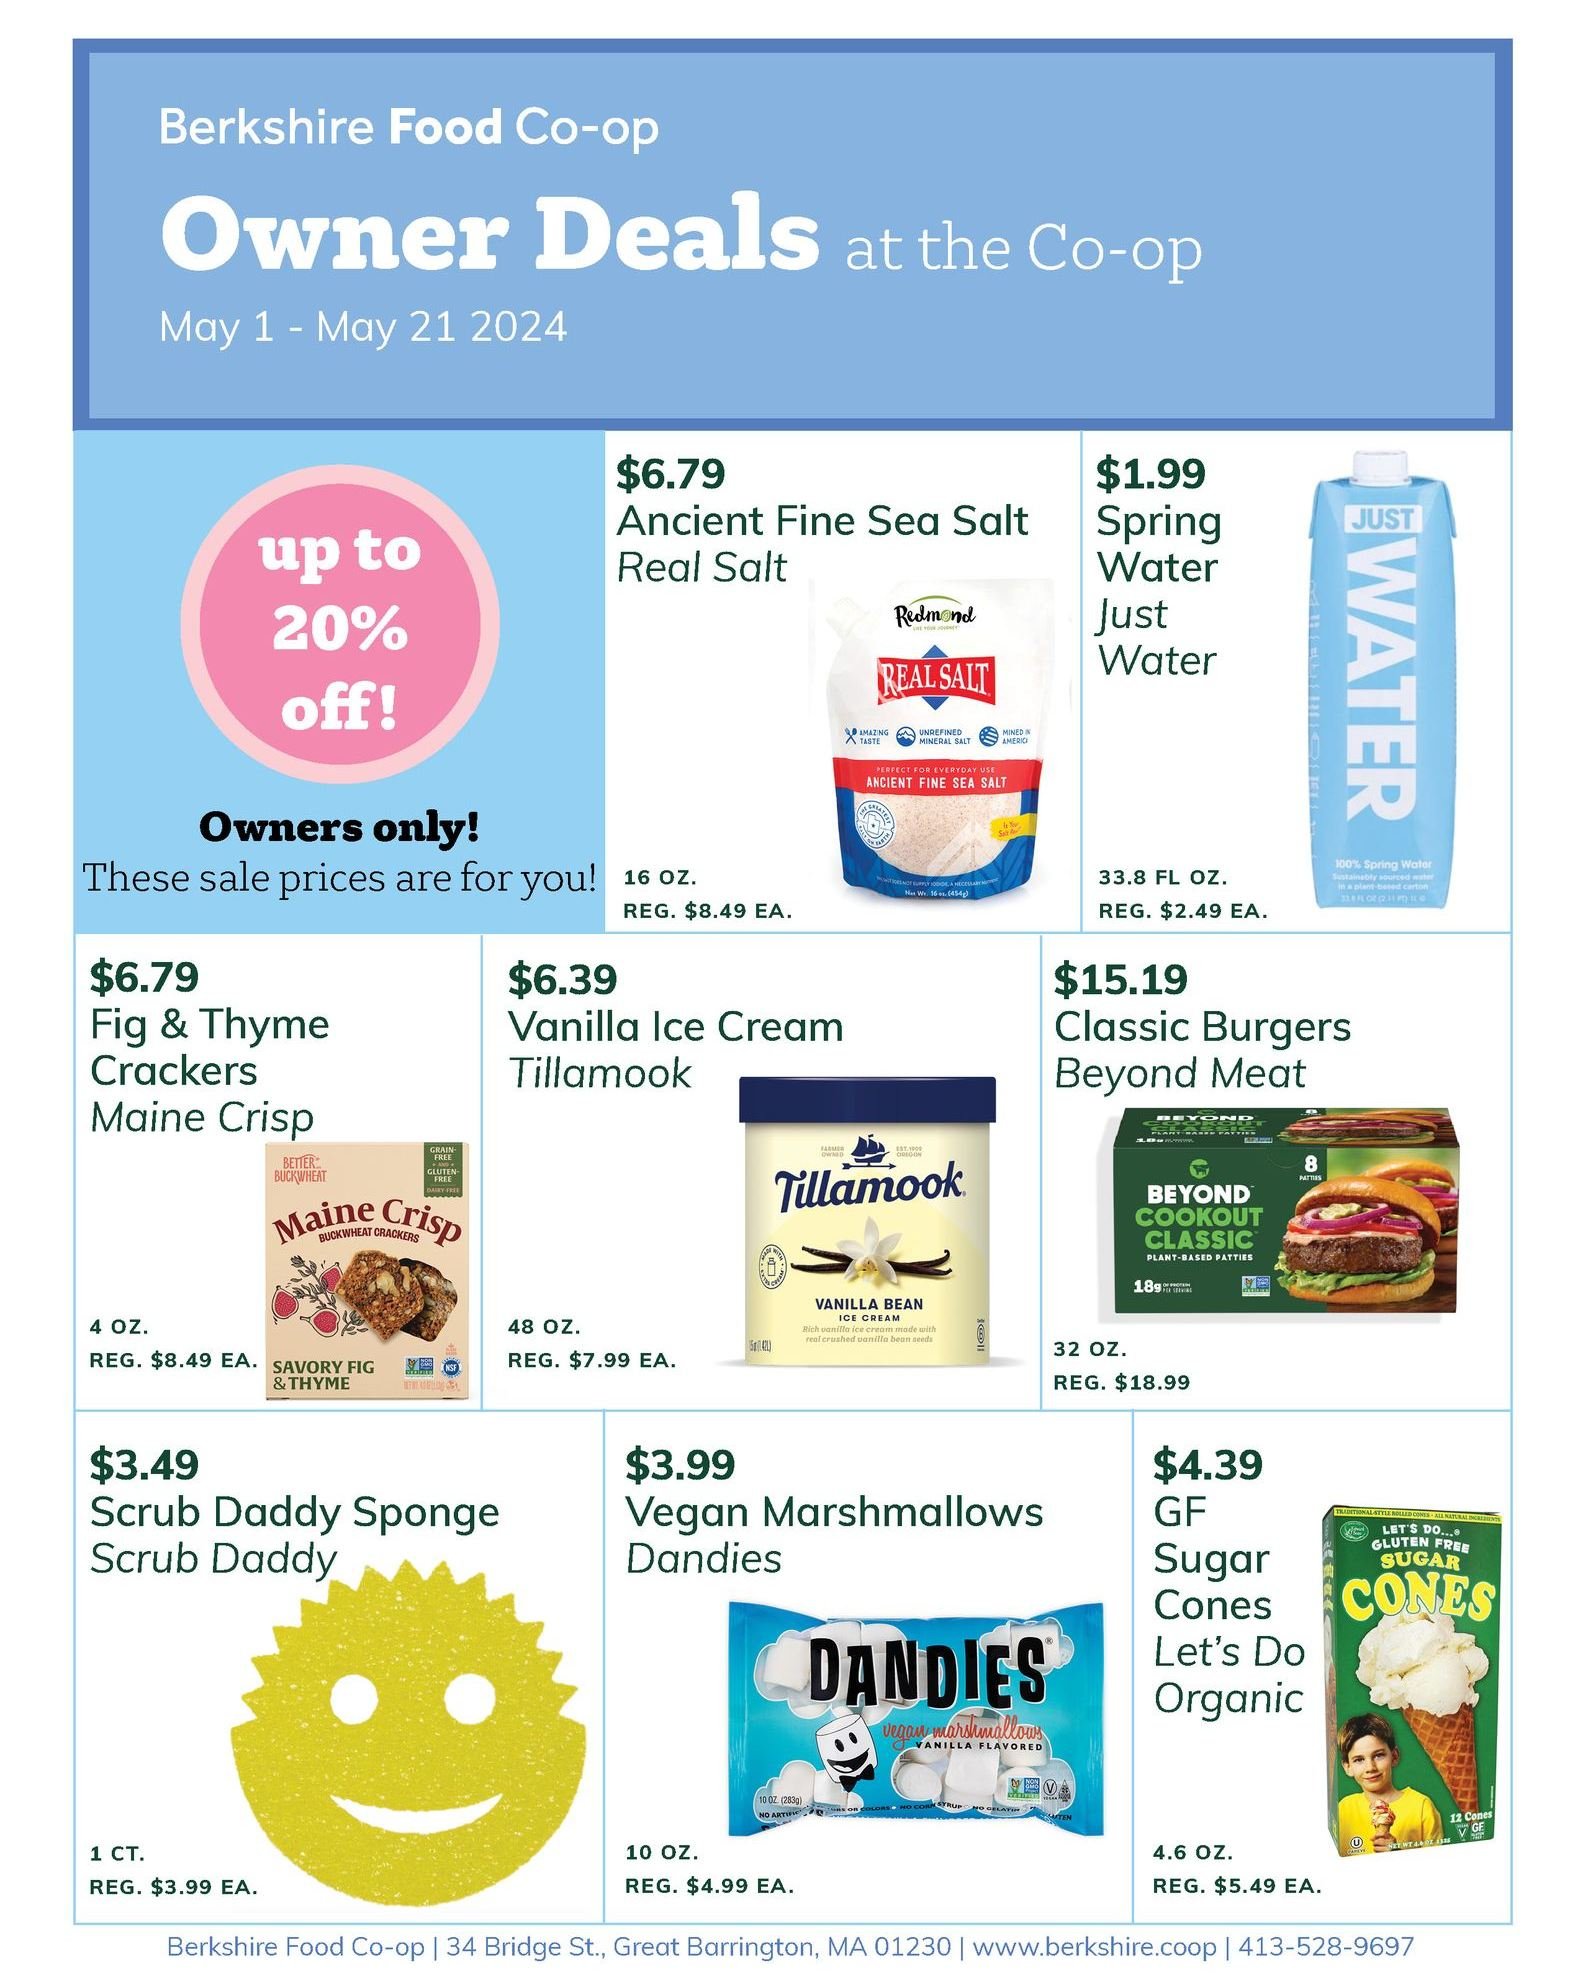 Anyone can shop at the Co-op, but Owners get exclusive benefits &amp; discounts on various items! Here are our current Owner Deals 🩵 To join 5000+ community members and become a Co-op Owner, make a one-time refundable purchase of an Equity Share for